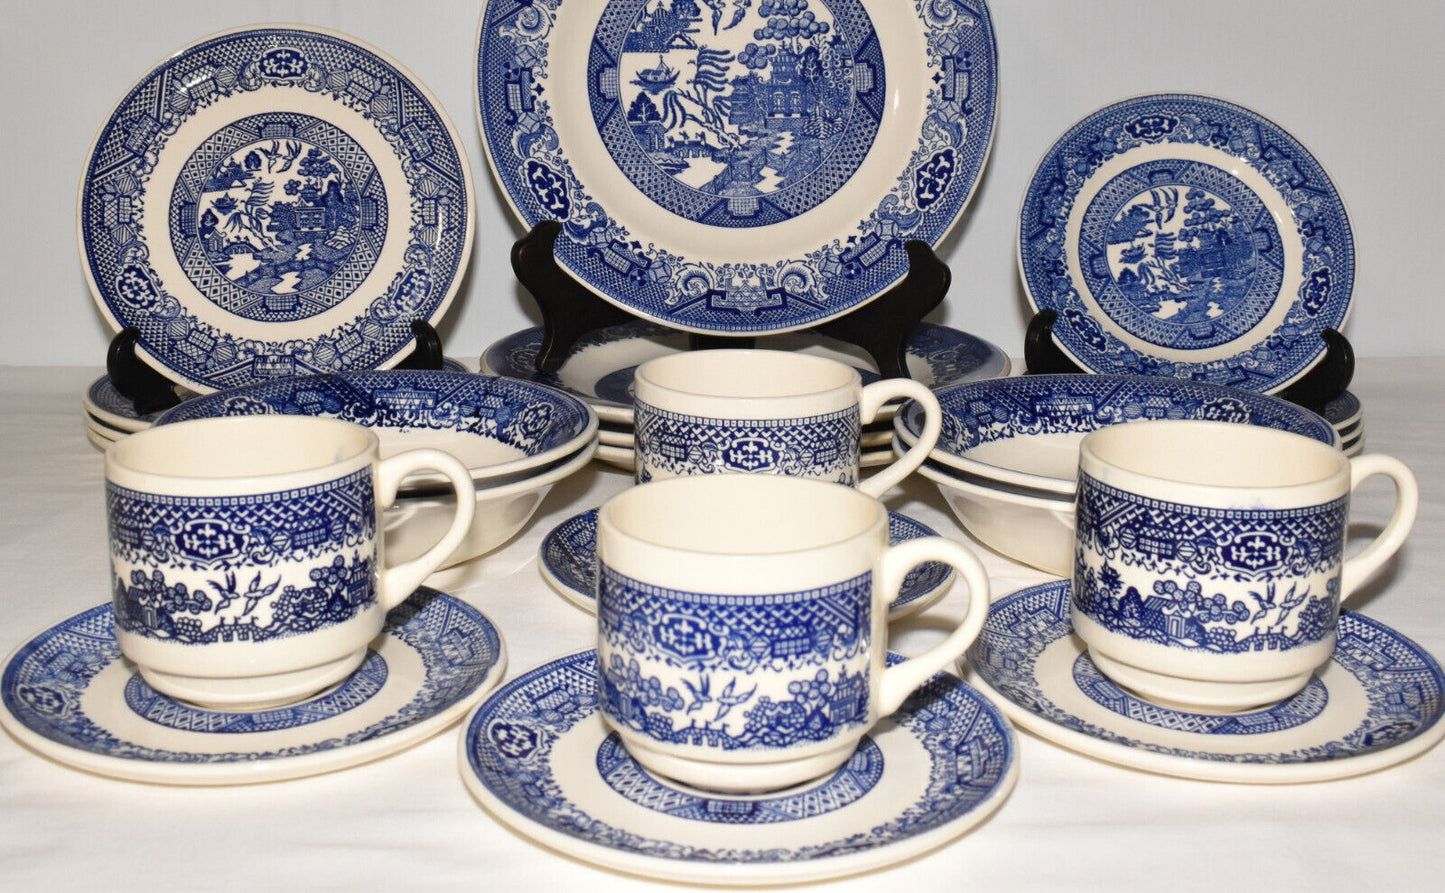 Vintage Blue Willow China Dinnerware 24pcs Service for 4 Blue & White Dishes Set 3